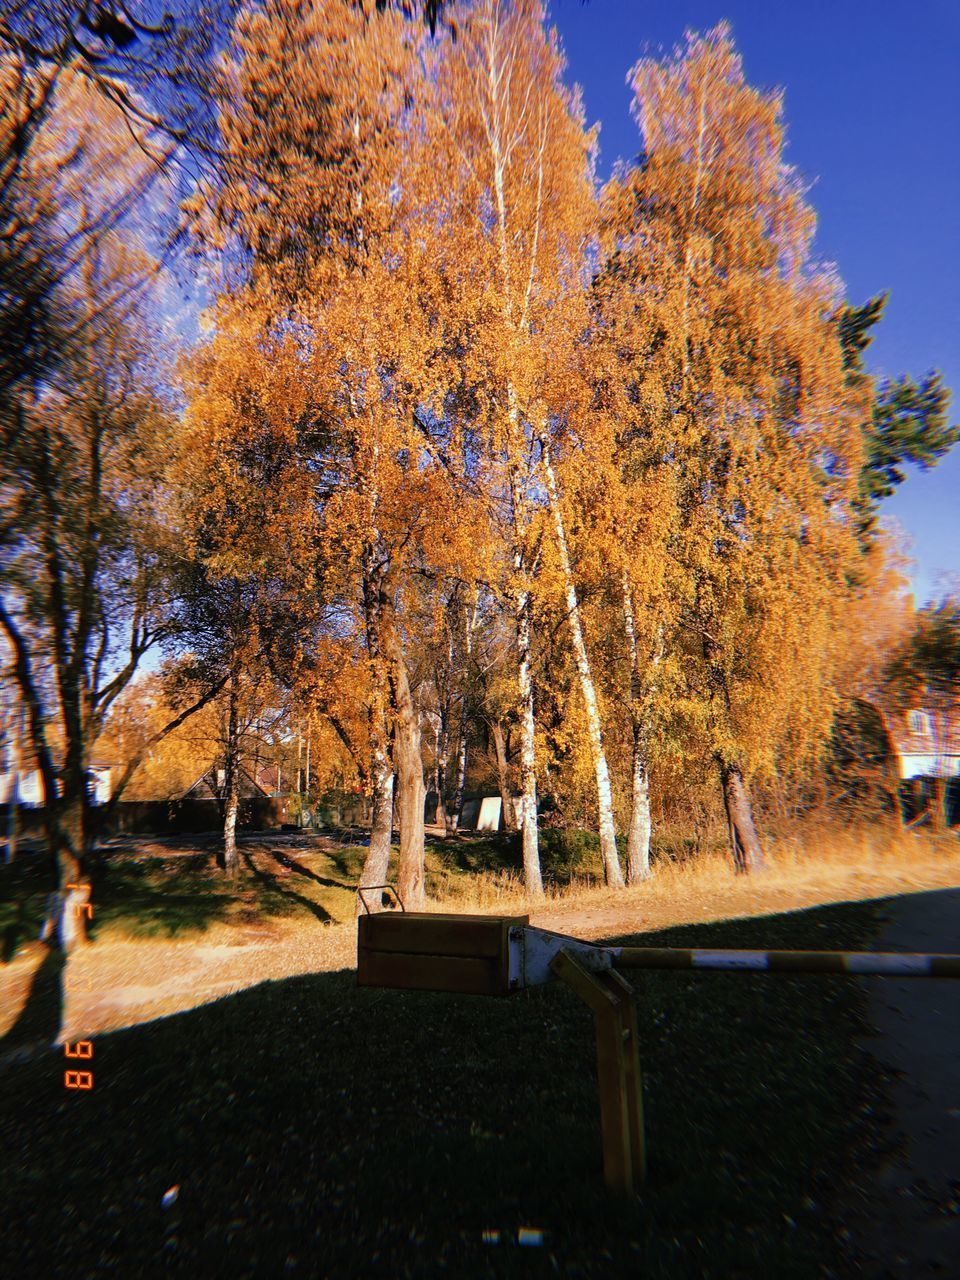 TREES IN PARK AGAINST SKY DURING AUTUMN AT NIGHT